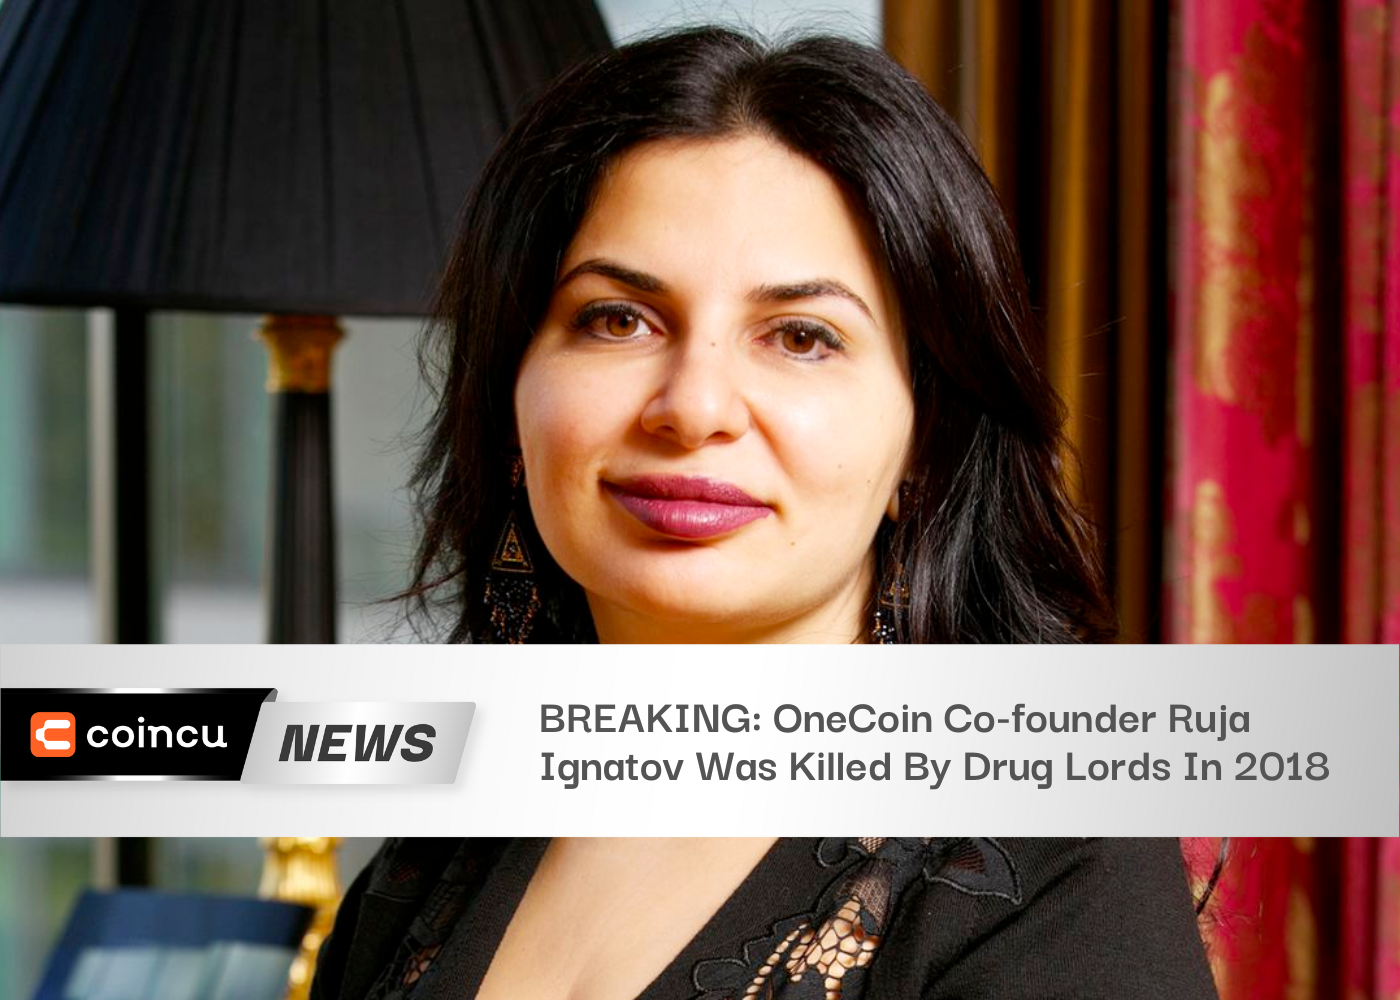 BREAKING: OneCoin Co-founder Ruja Ignatov Was Killed By Drug Lords In 2018